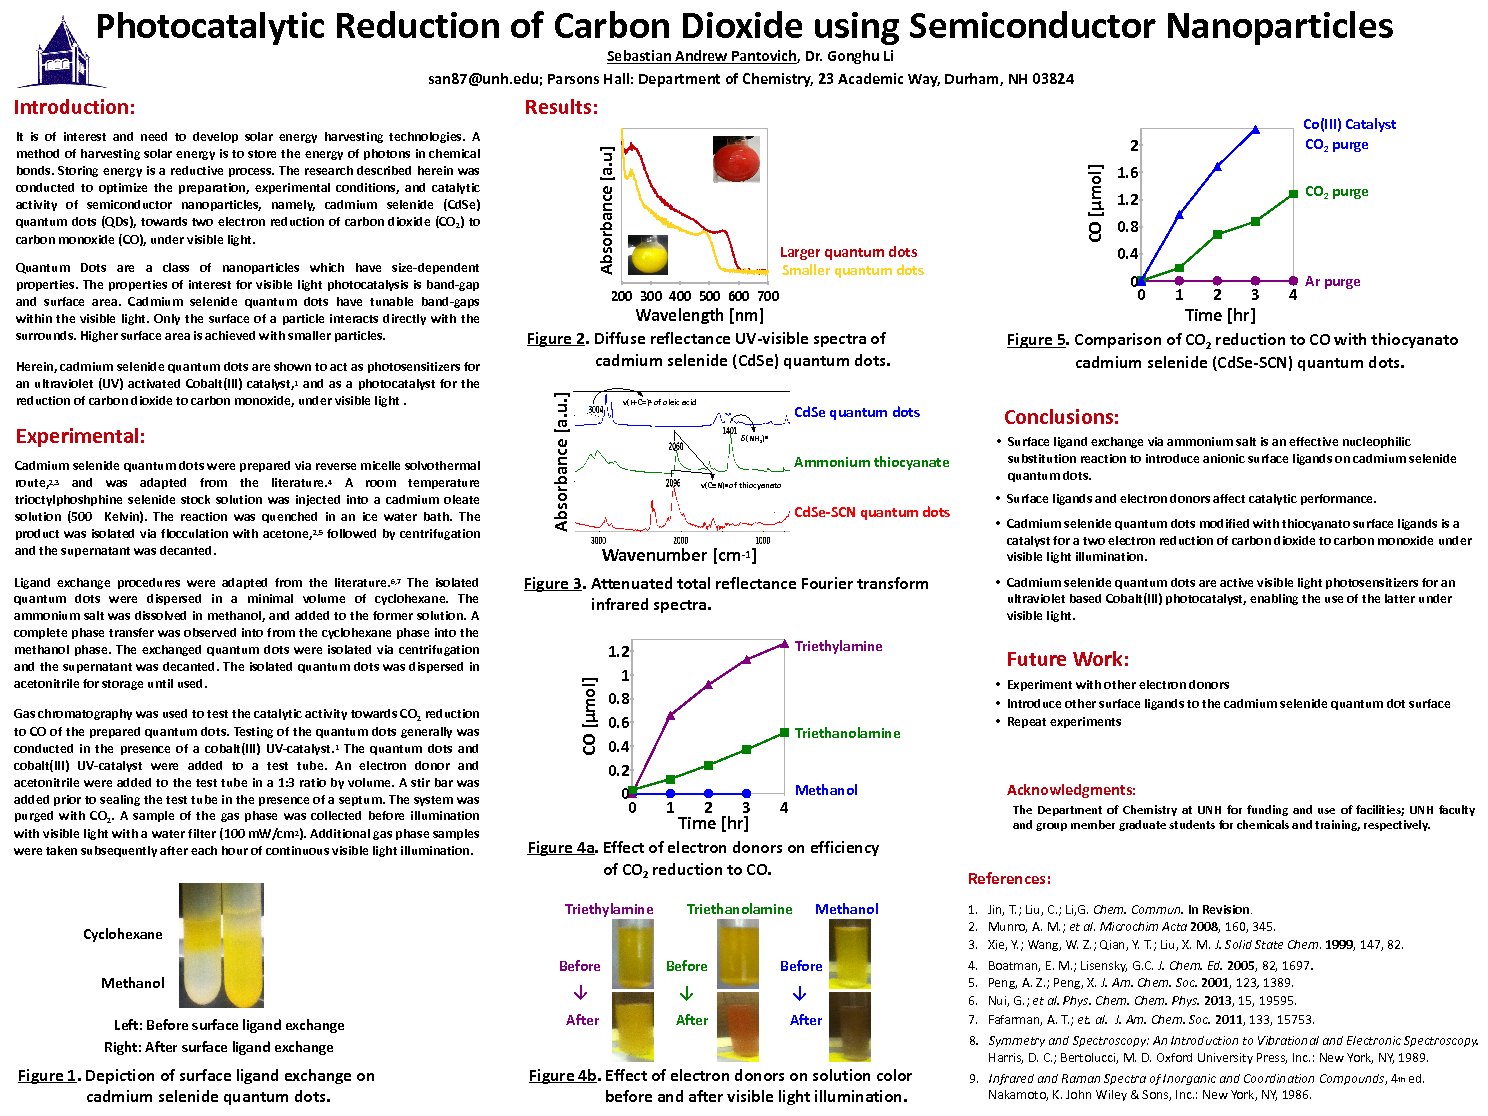 Photocatalytic Reduction Of Carbon Dioxide Using Semiconductor Nanoparticles by san87